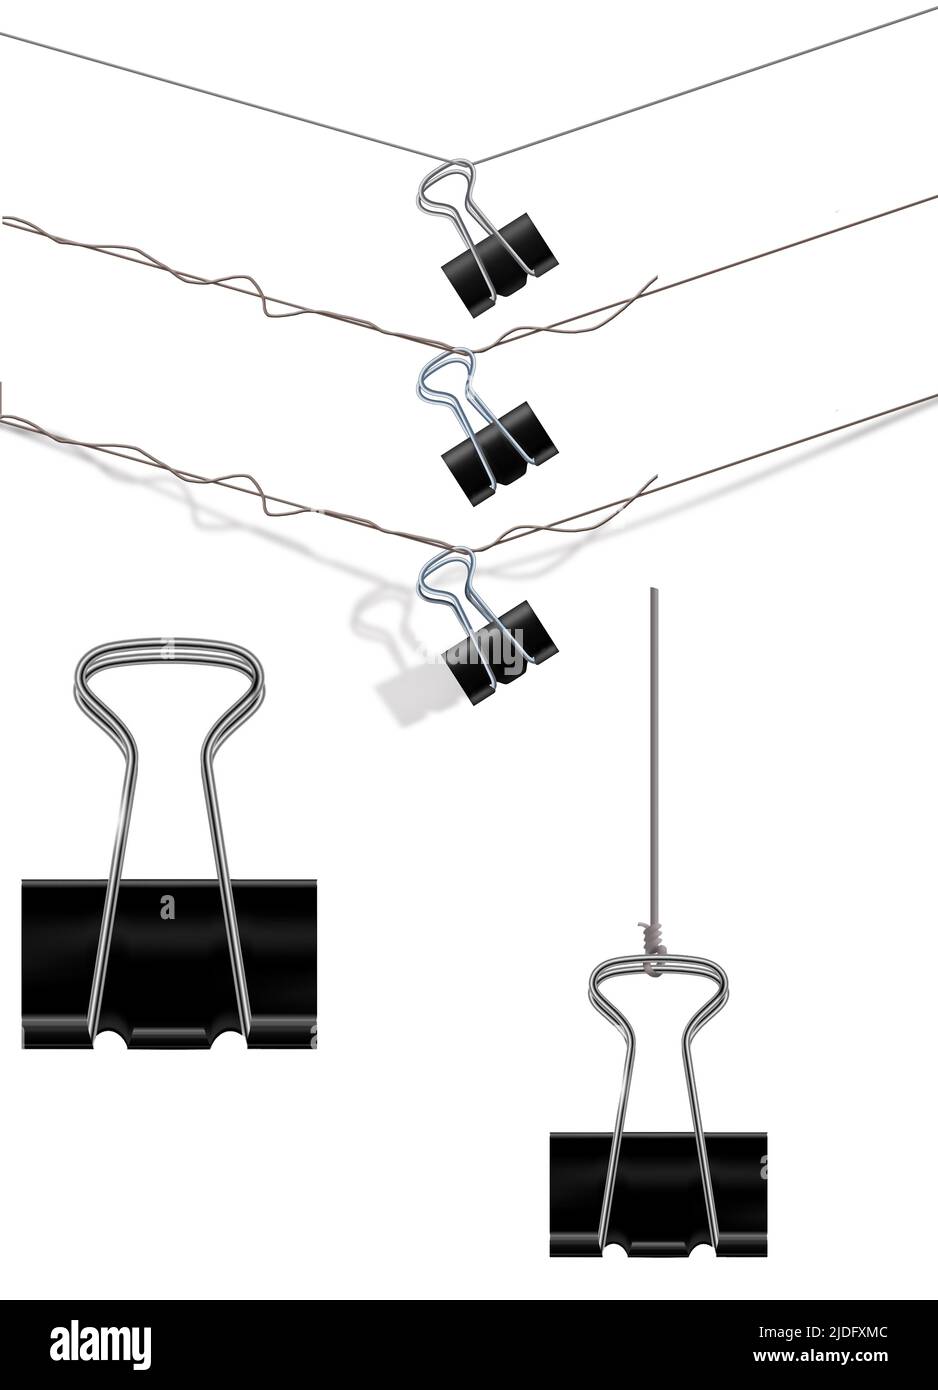 Paper clamps are seen hanging on wire in these 3-d illustrations to be used a graphic resources. Stock Photo